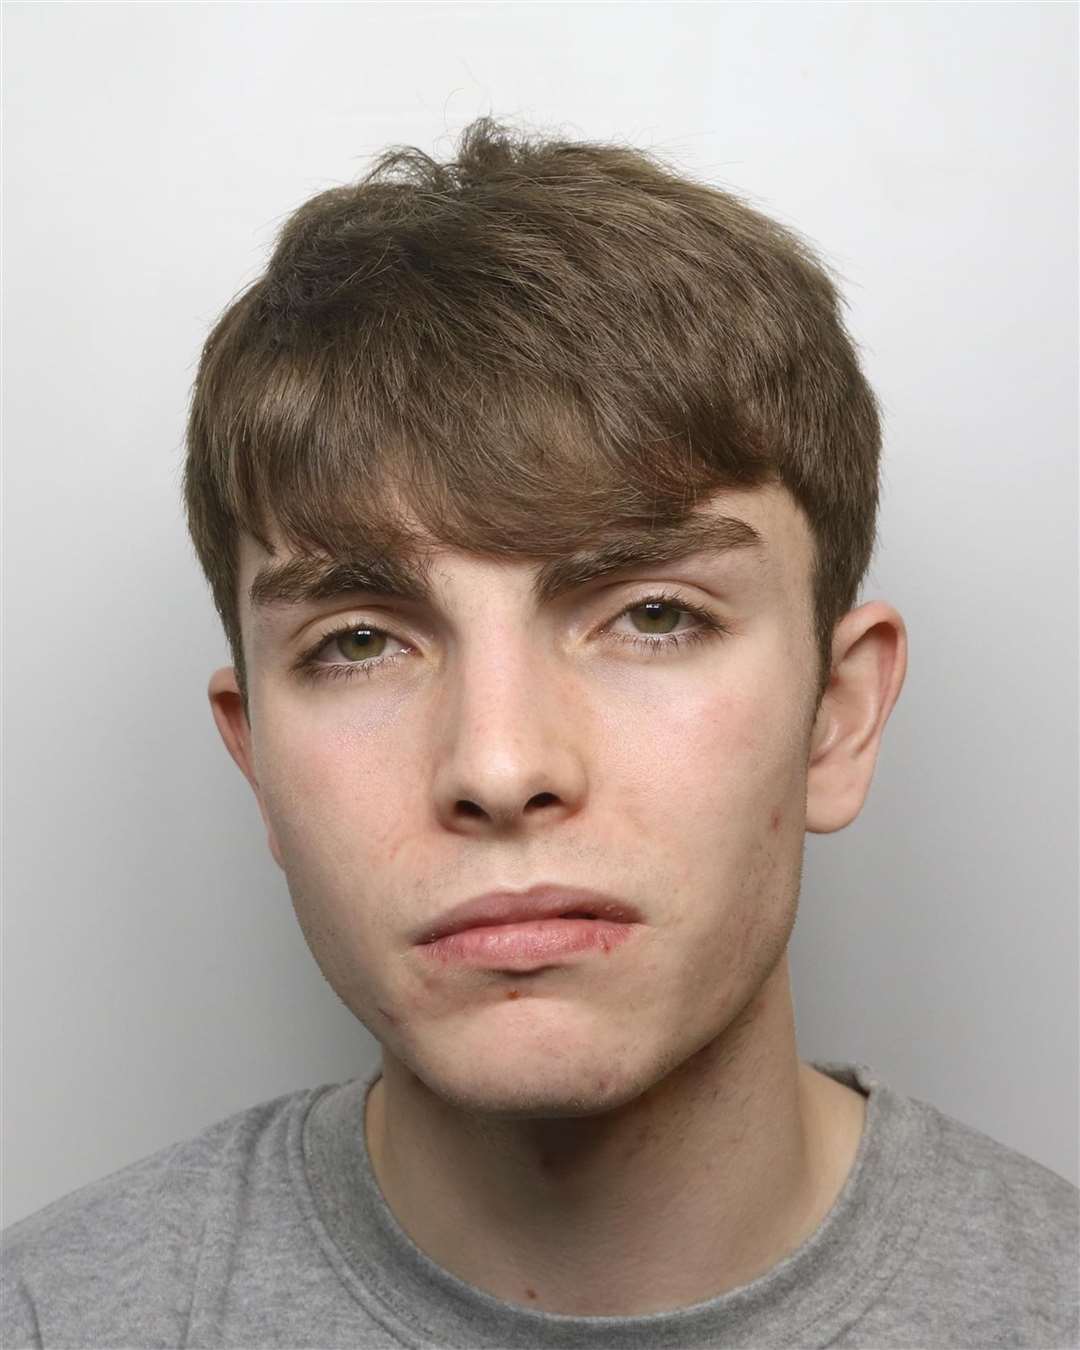 Thomas Griffiths has been sentenced to a minimum of 12 years and six months in prison for stabbing his former girlfriend Ellie Gould (Wiltshire Police/PA)